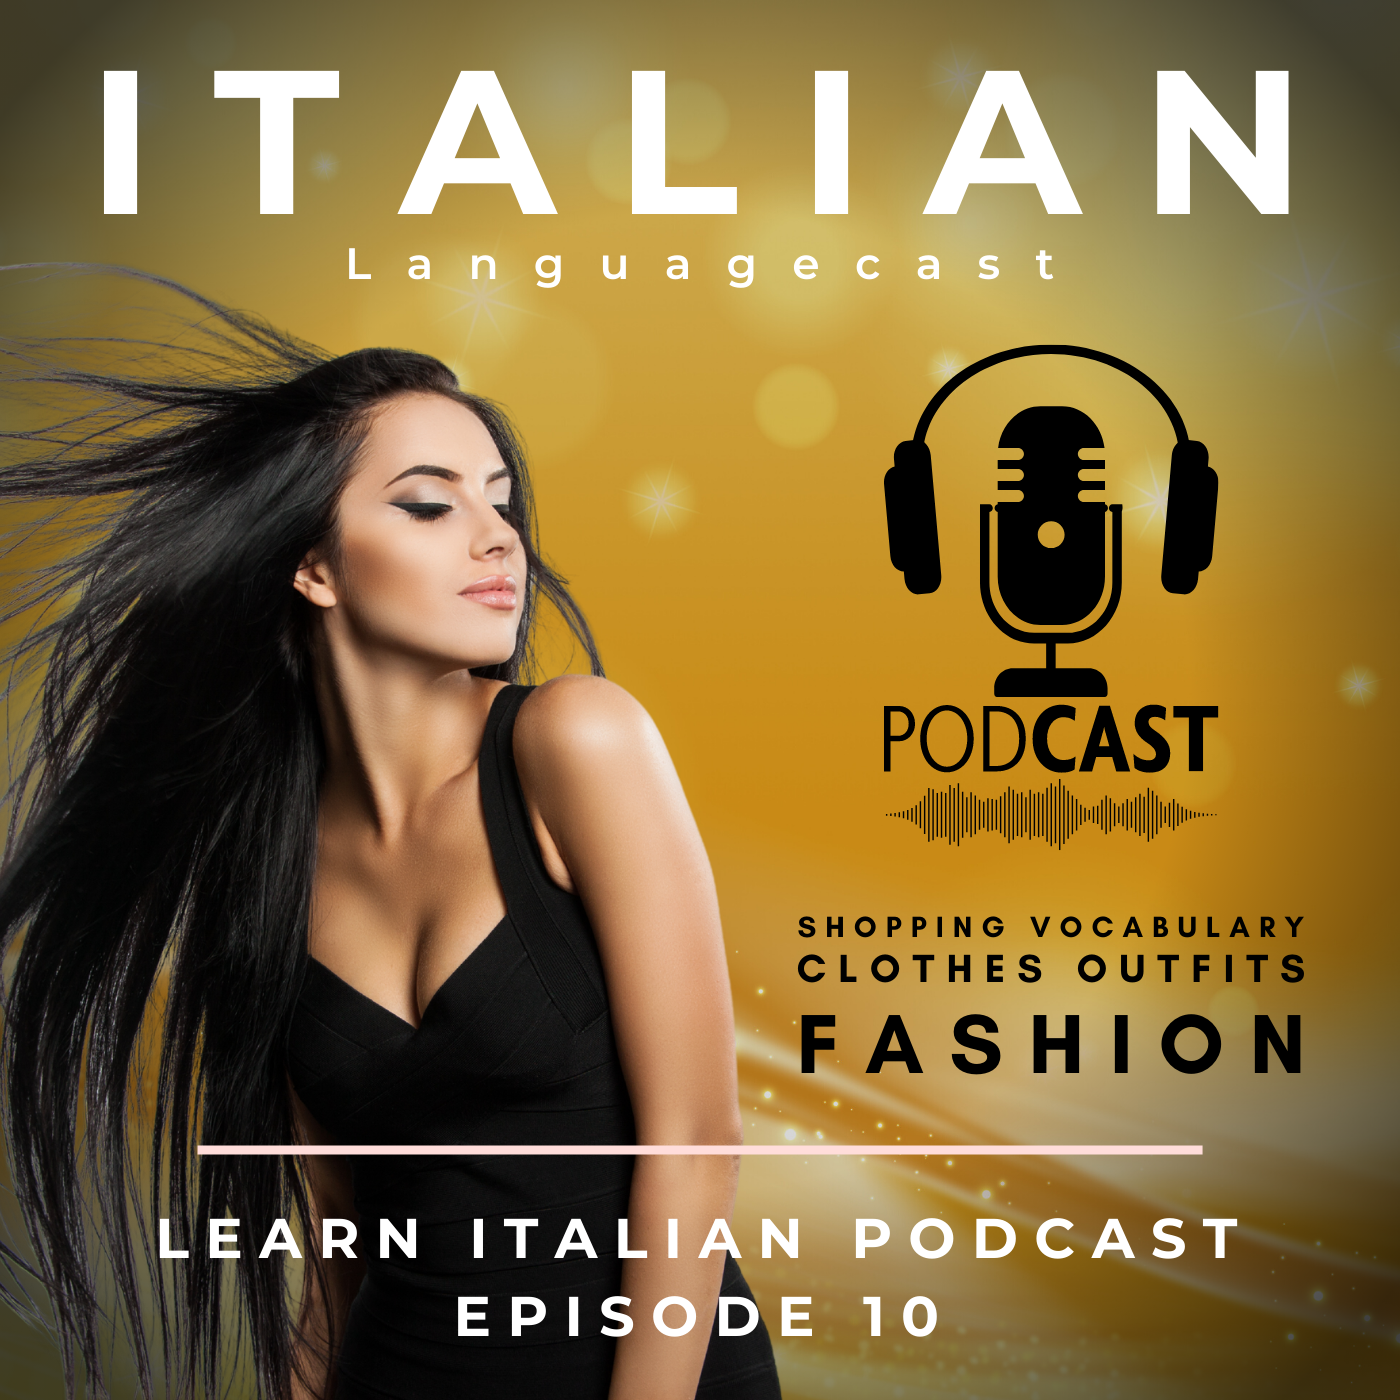 Learn Italian Podcast: Shopping Vocabulary - Clothes Outfits Fashion (Episode 10)